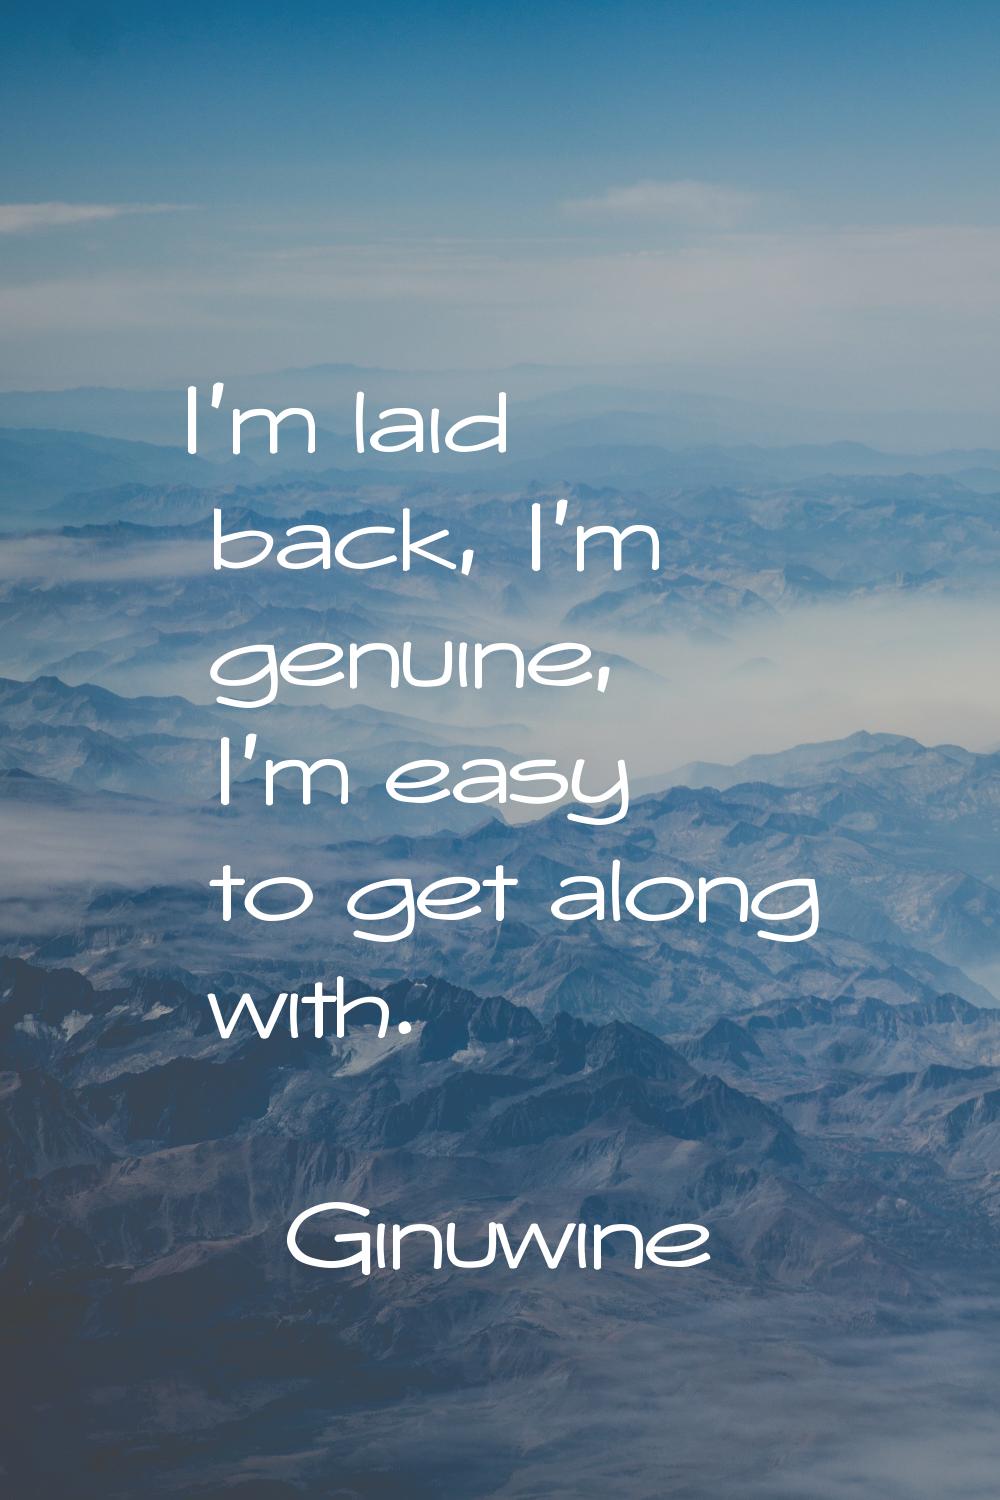 I'm laid back, I'm genuine, I'm easy to get along with.